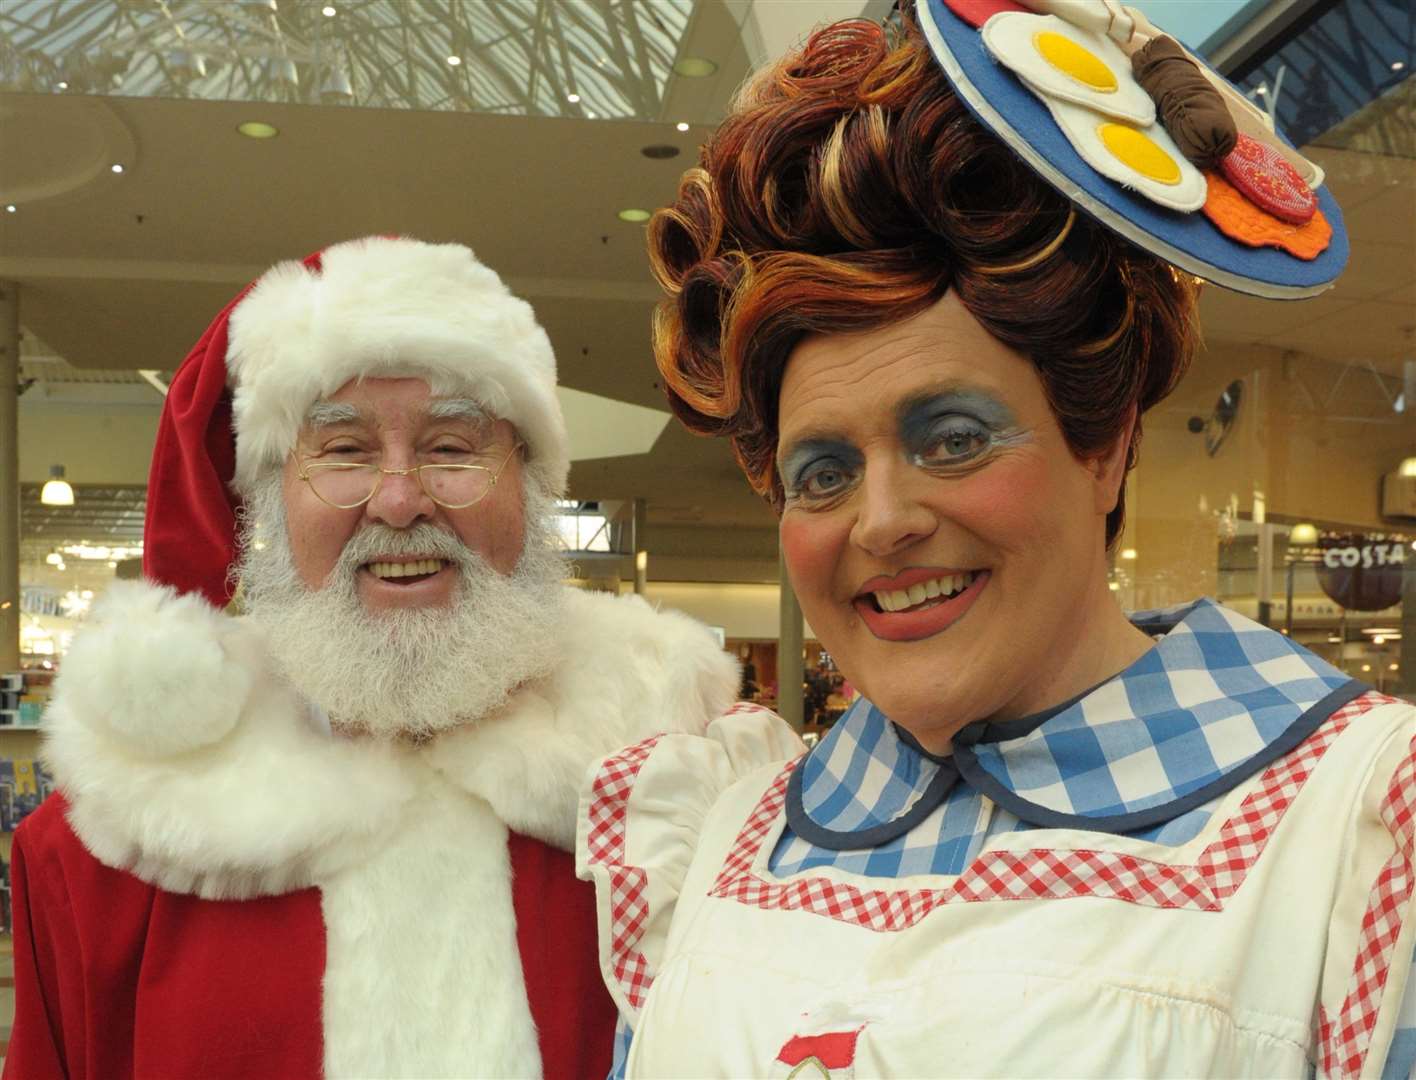 Panto dame Ian Good with Santa at the Hempstead Valley Shopping Centre grotto Picture: Steve Crispe